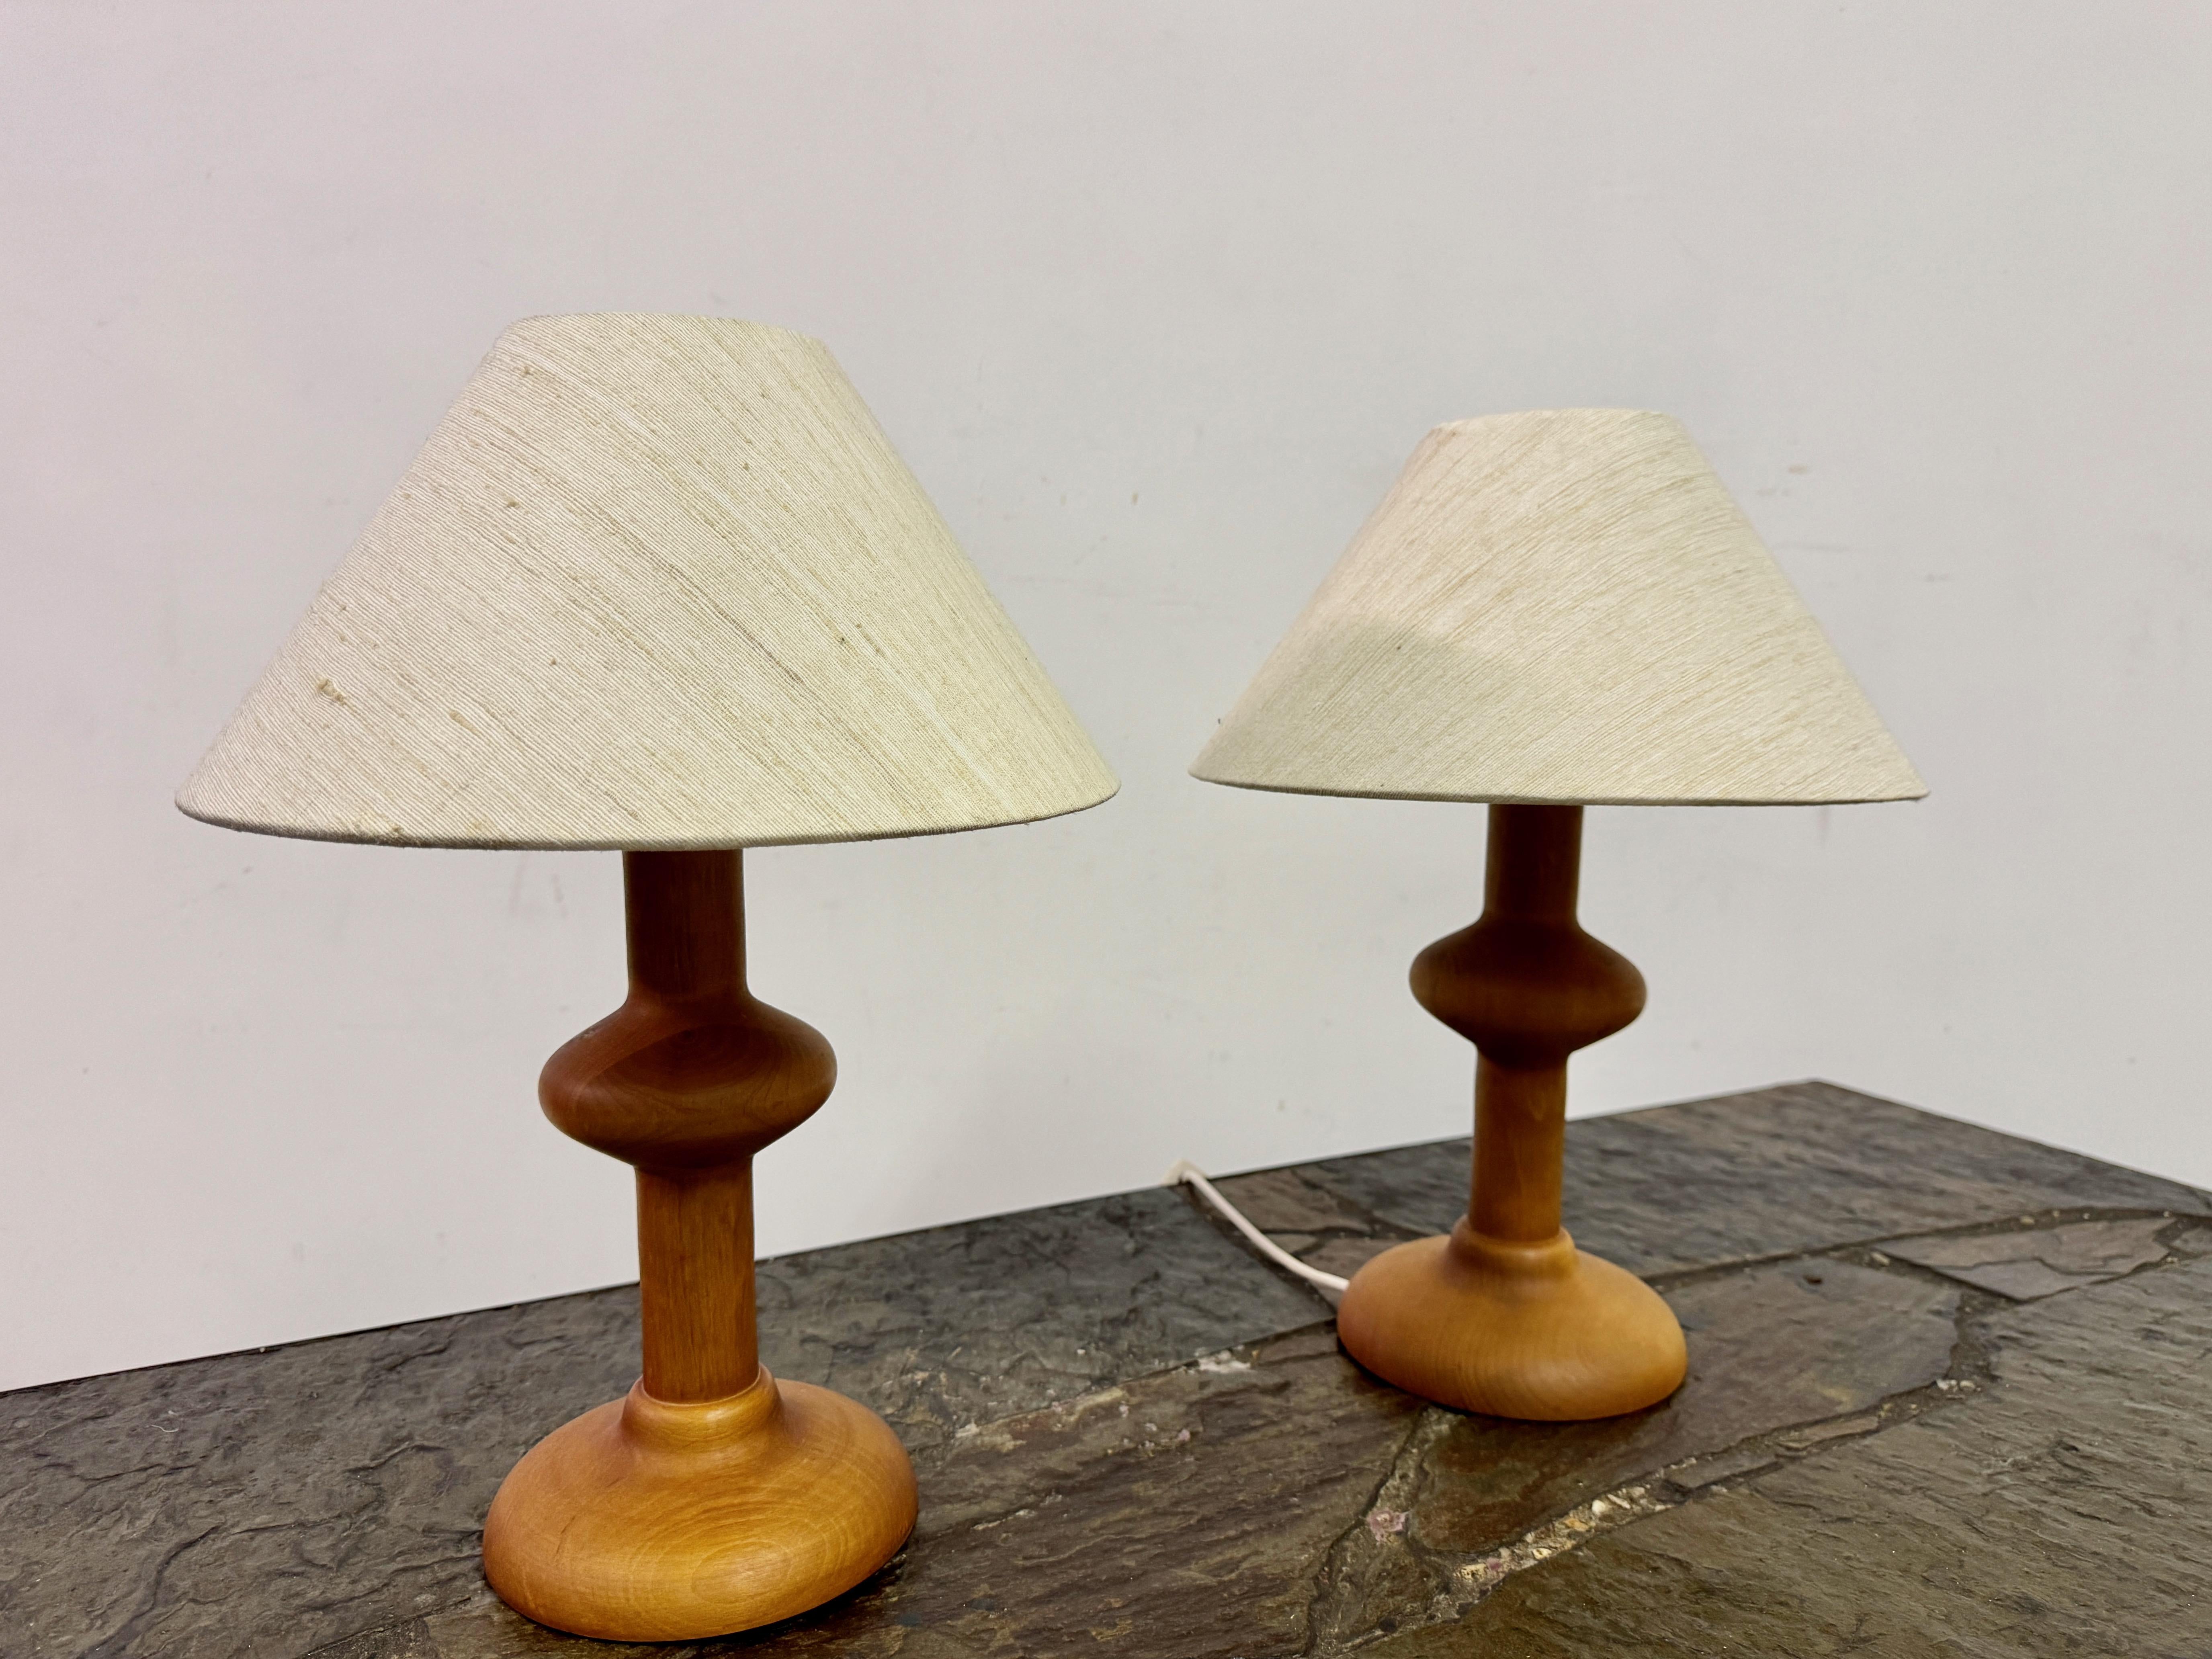 Pair of table lamps

Turned wood

Orignal shades

Organic shape

1970s

Small crease in one of the shades